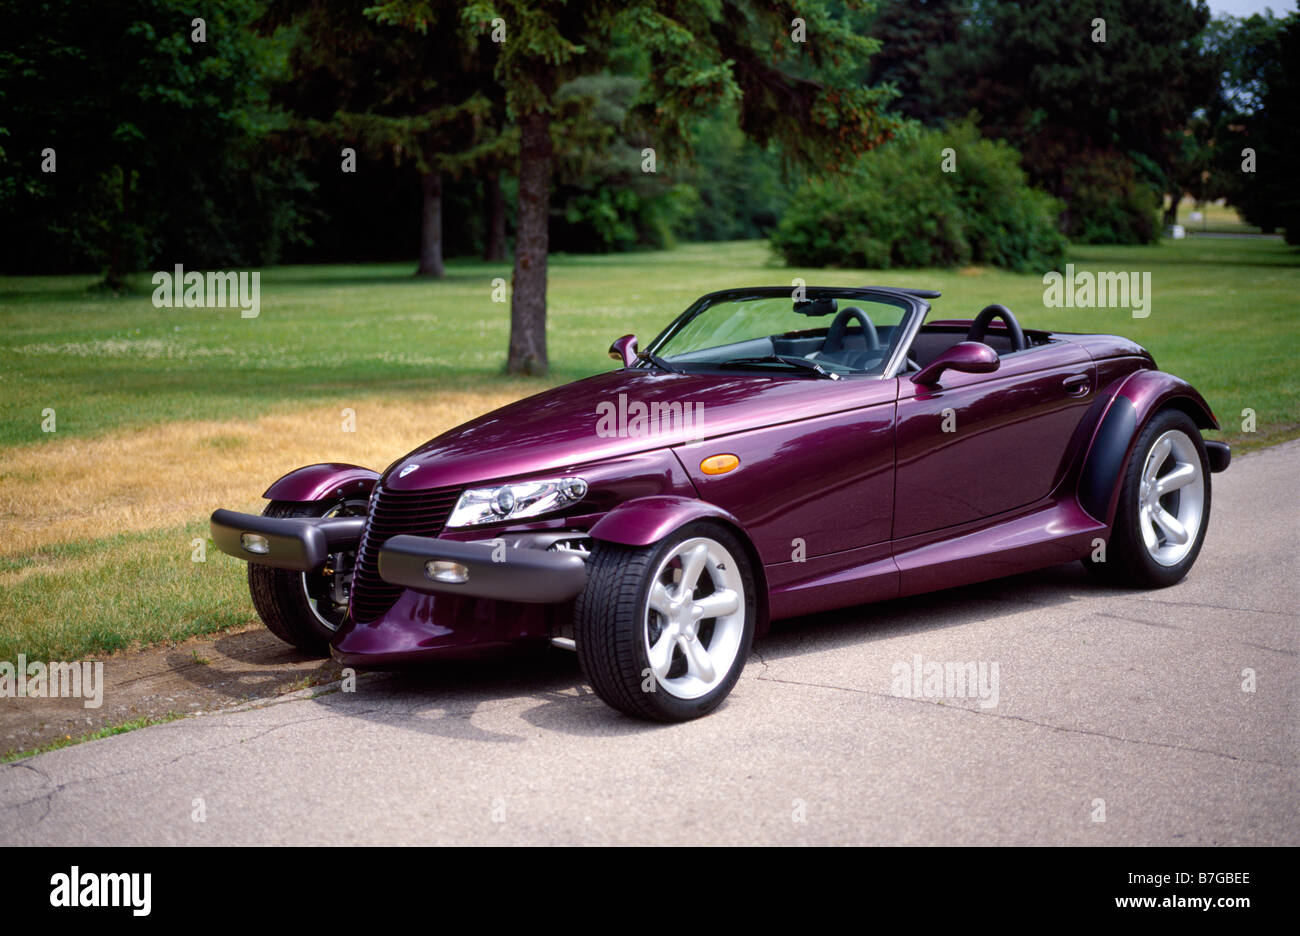 1999 Plymouth Prowler on pavement. Stock Photo